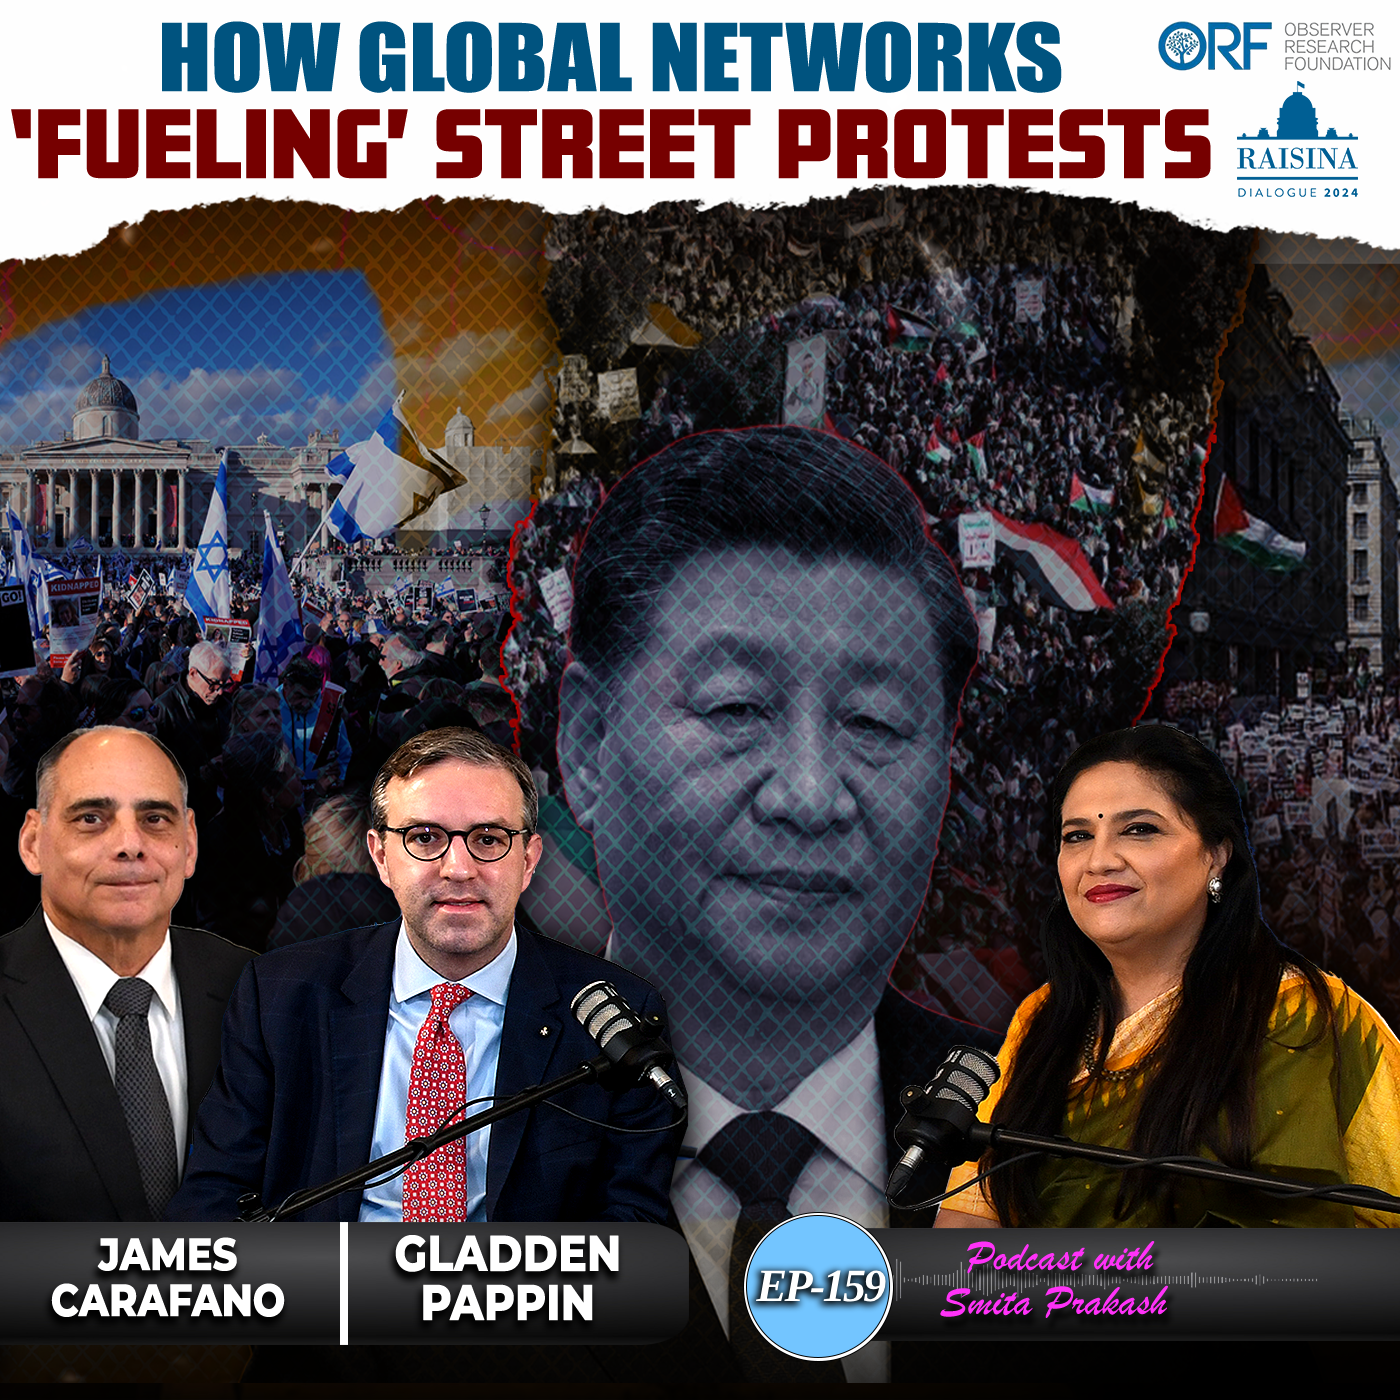 EP 159 - China's Global Network Triggering Street Protests Across The World?